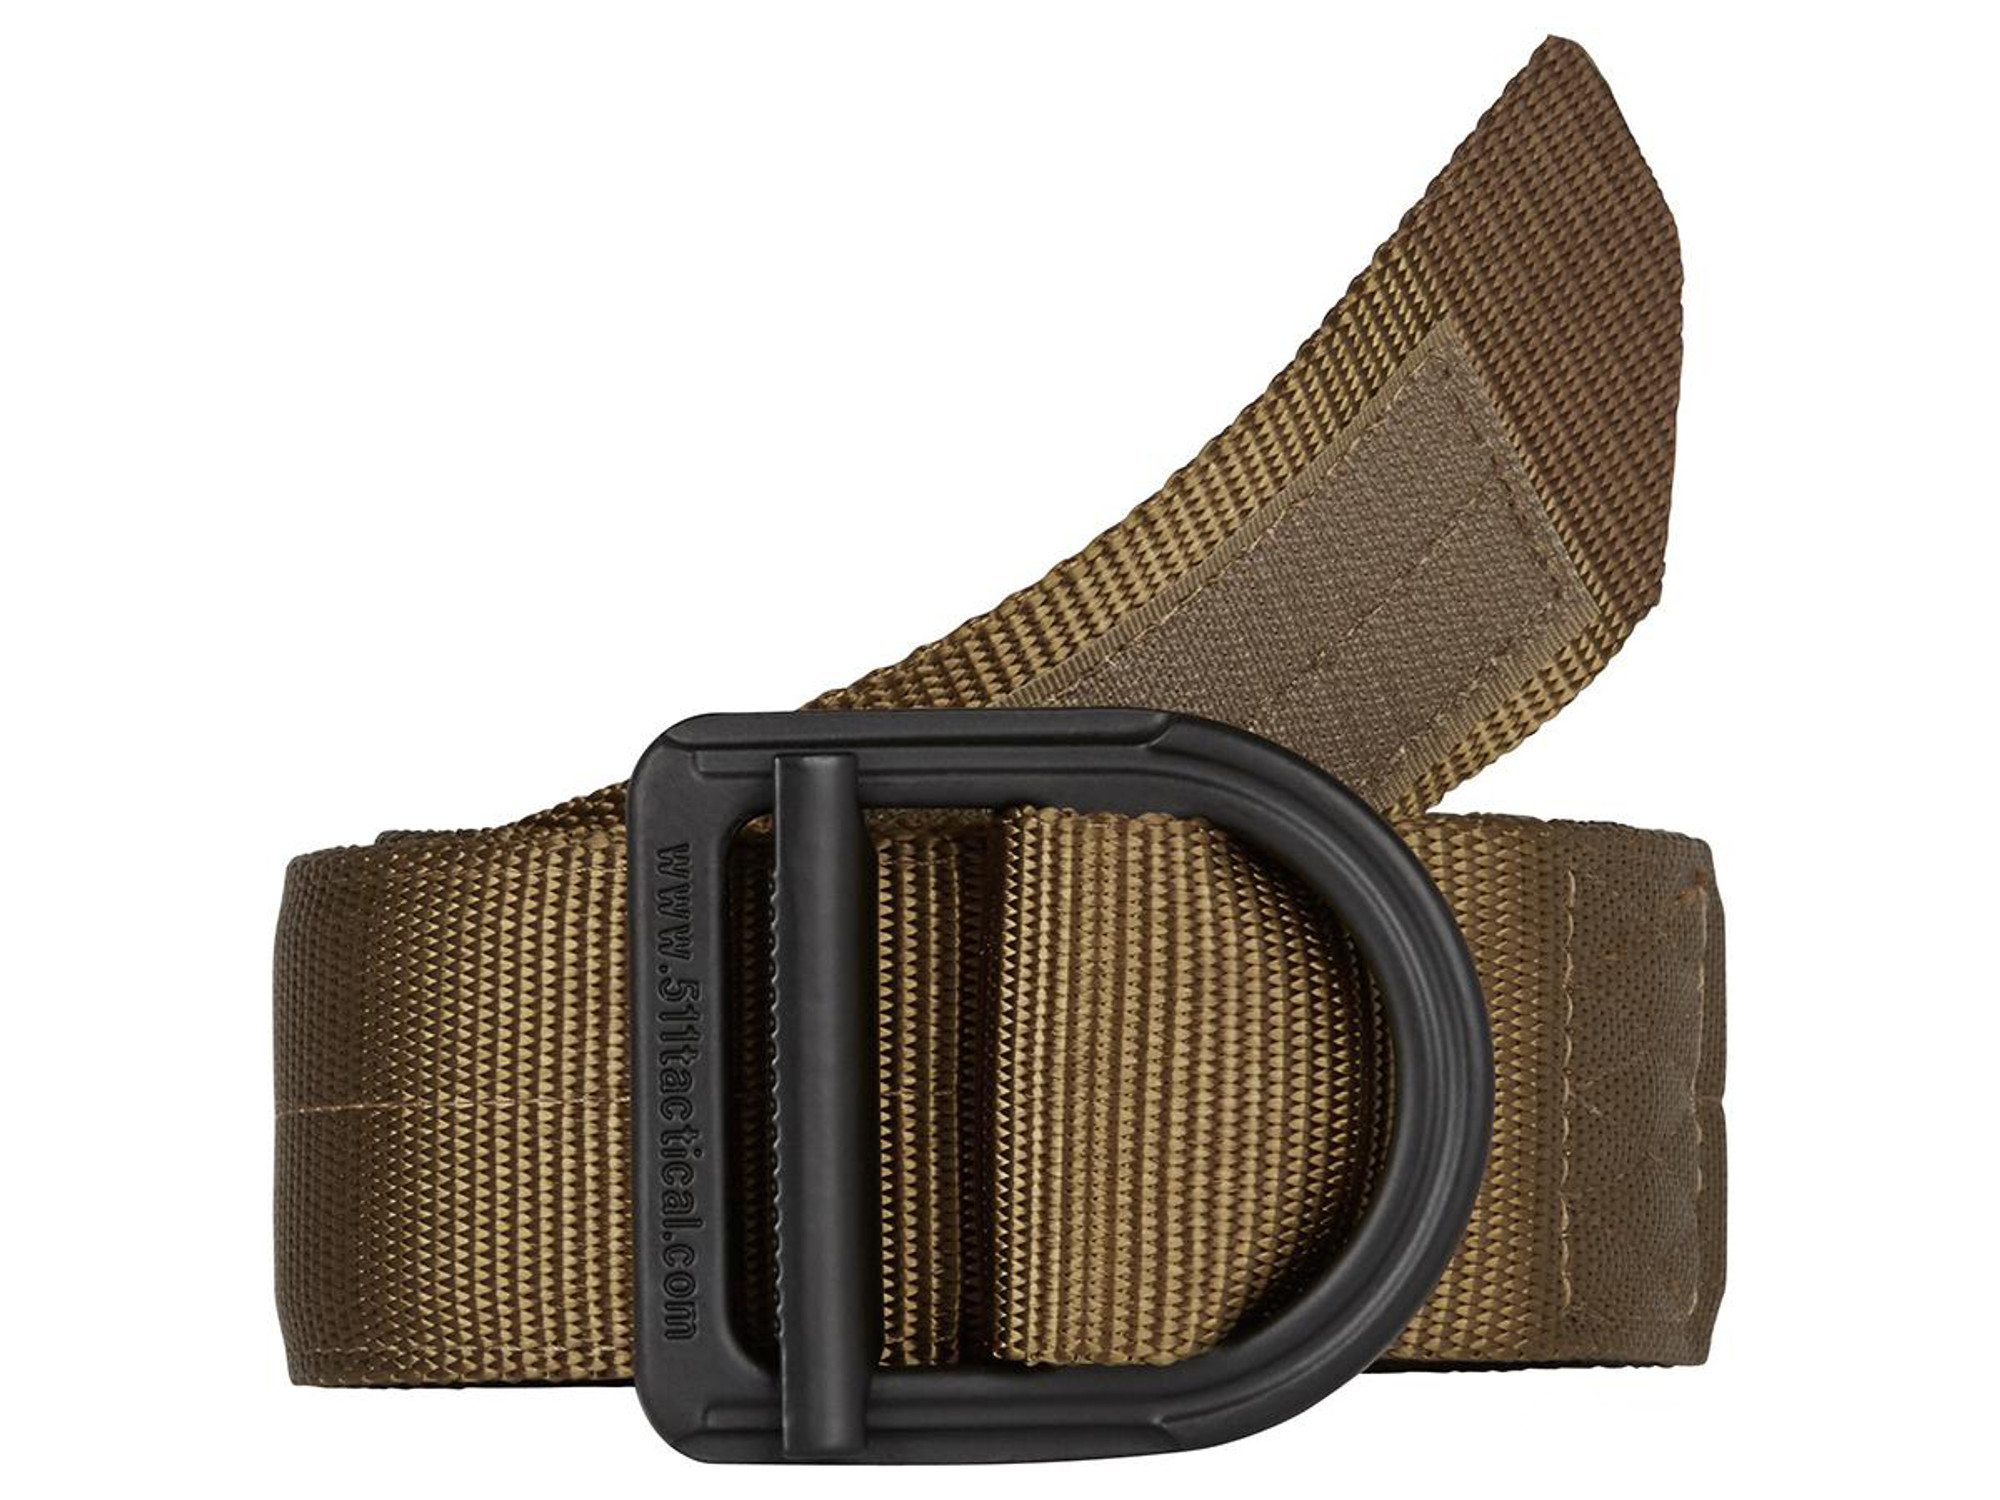 5.11 Tactical 1.75" Operator Belt - Coyote (Size: X-Large)